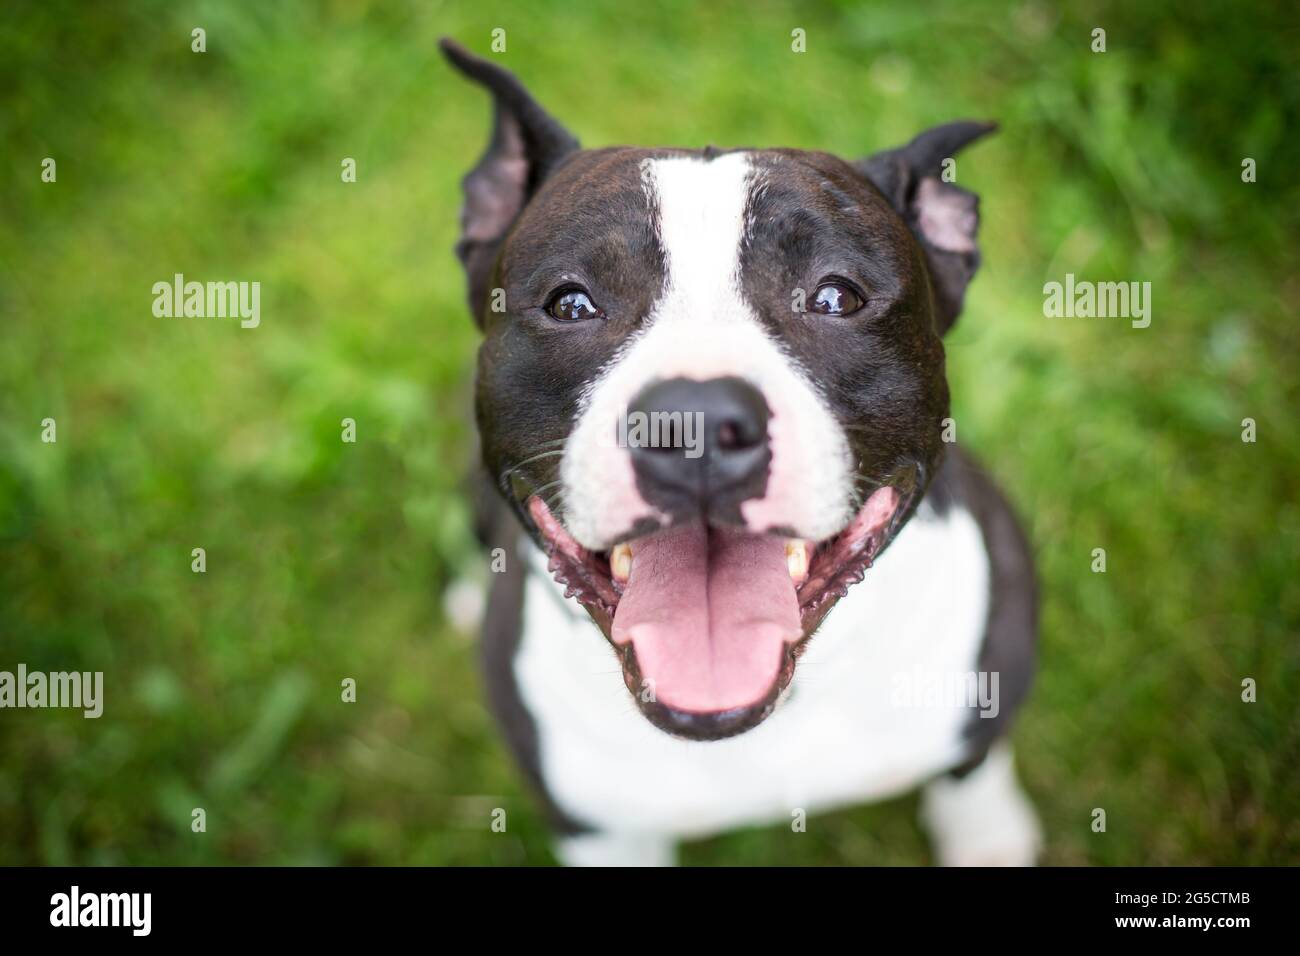 Black and white American Staffordshire Terrier Stock Photo